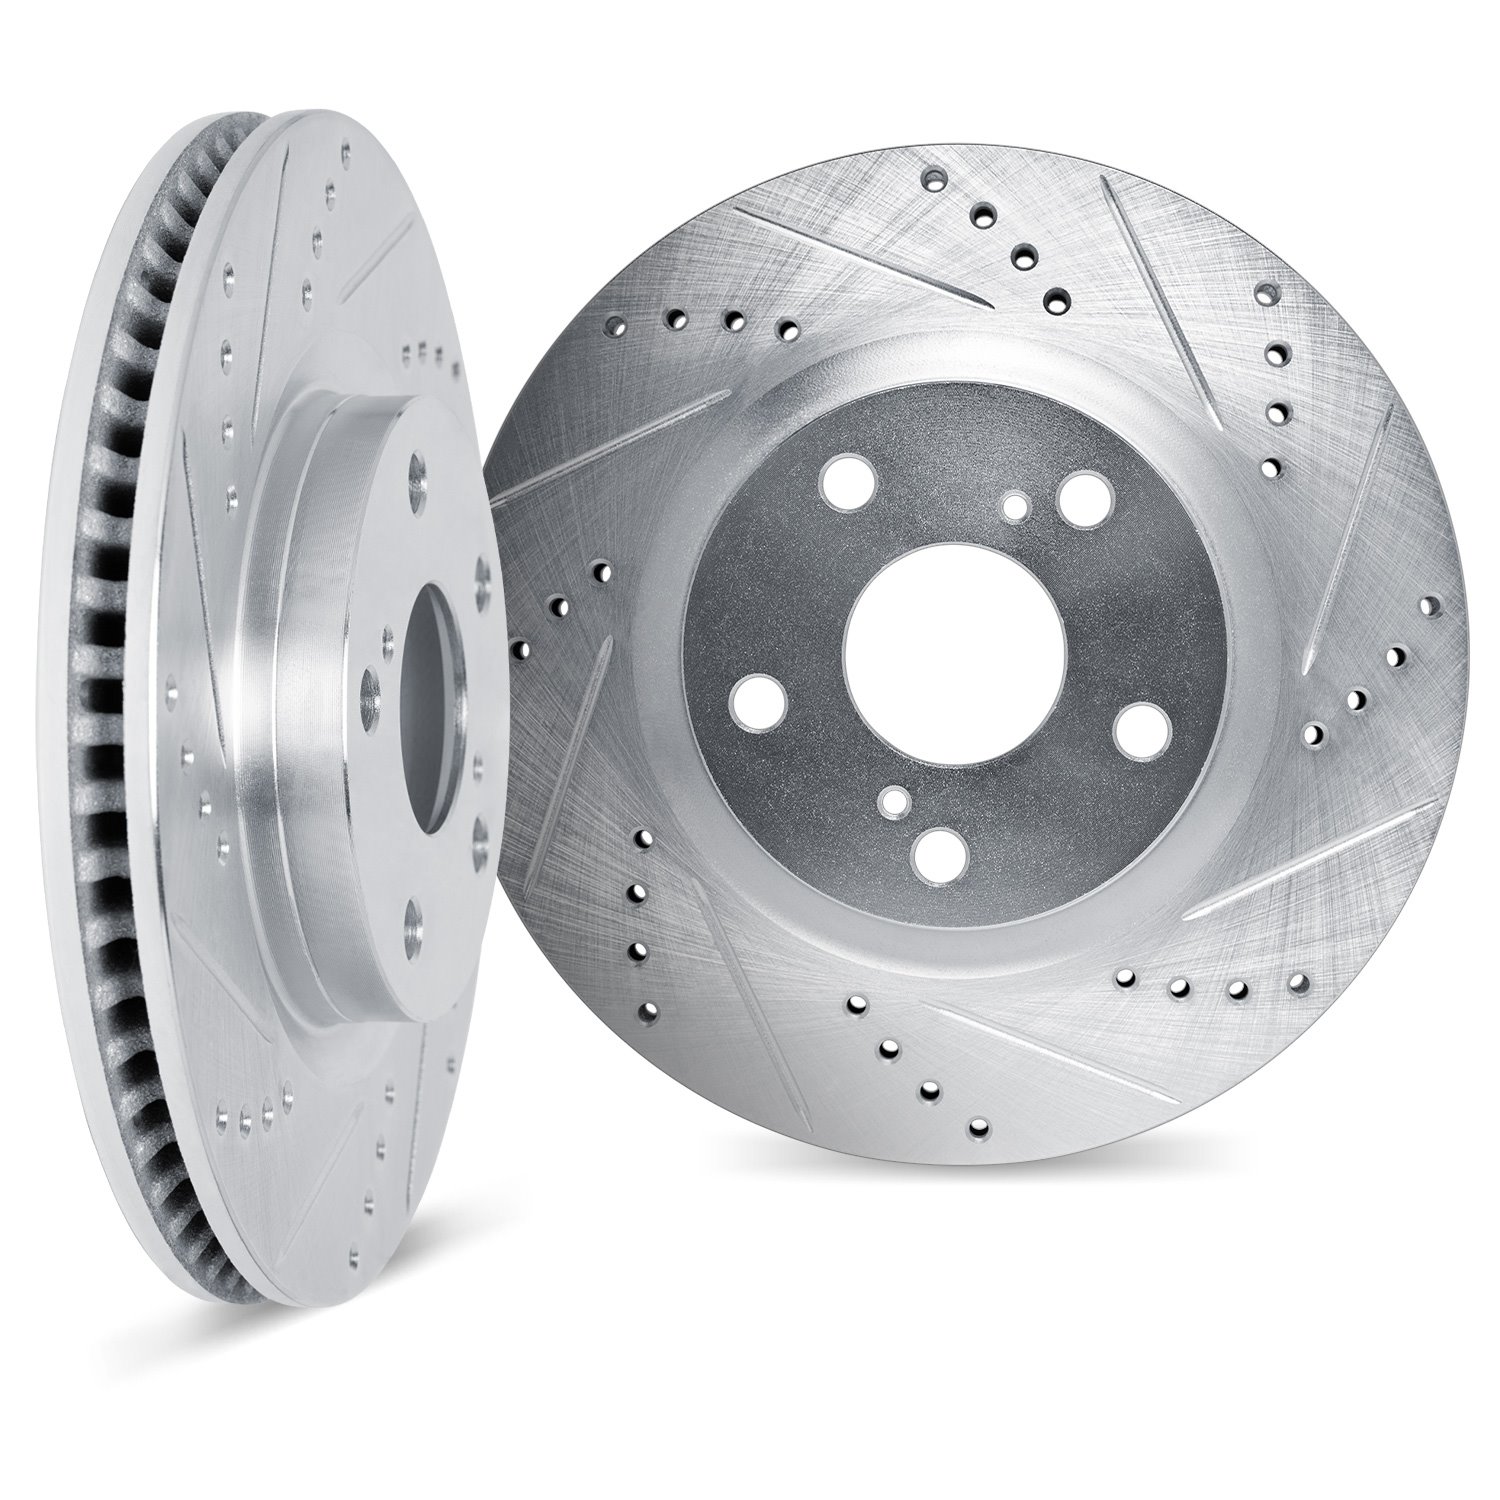 7002-58035 Drilled/Slotted Brake Rotors [Silver], Fits Select Acura/Honda, Position: Front